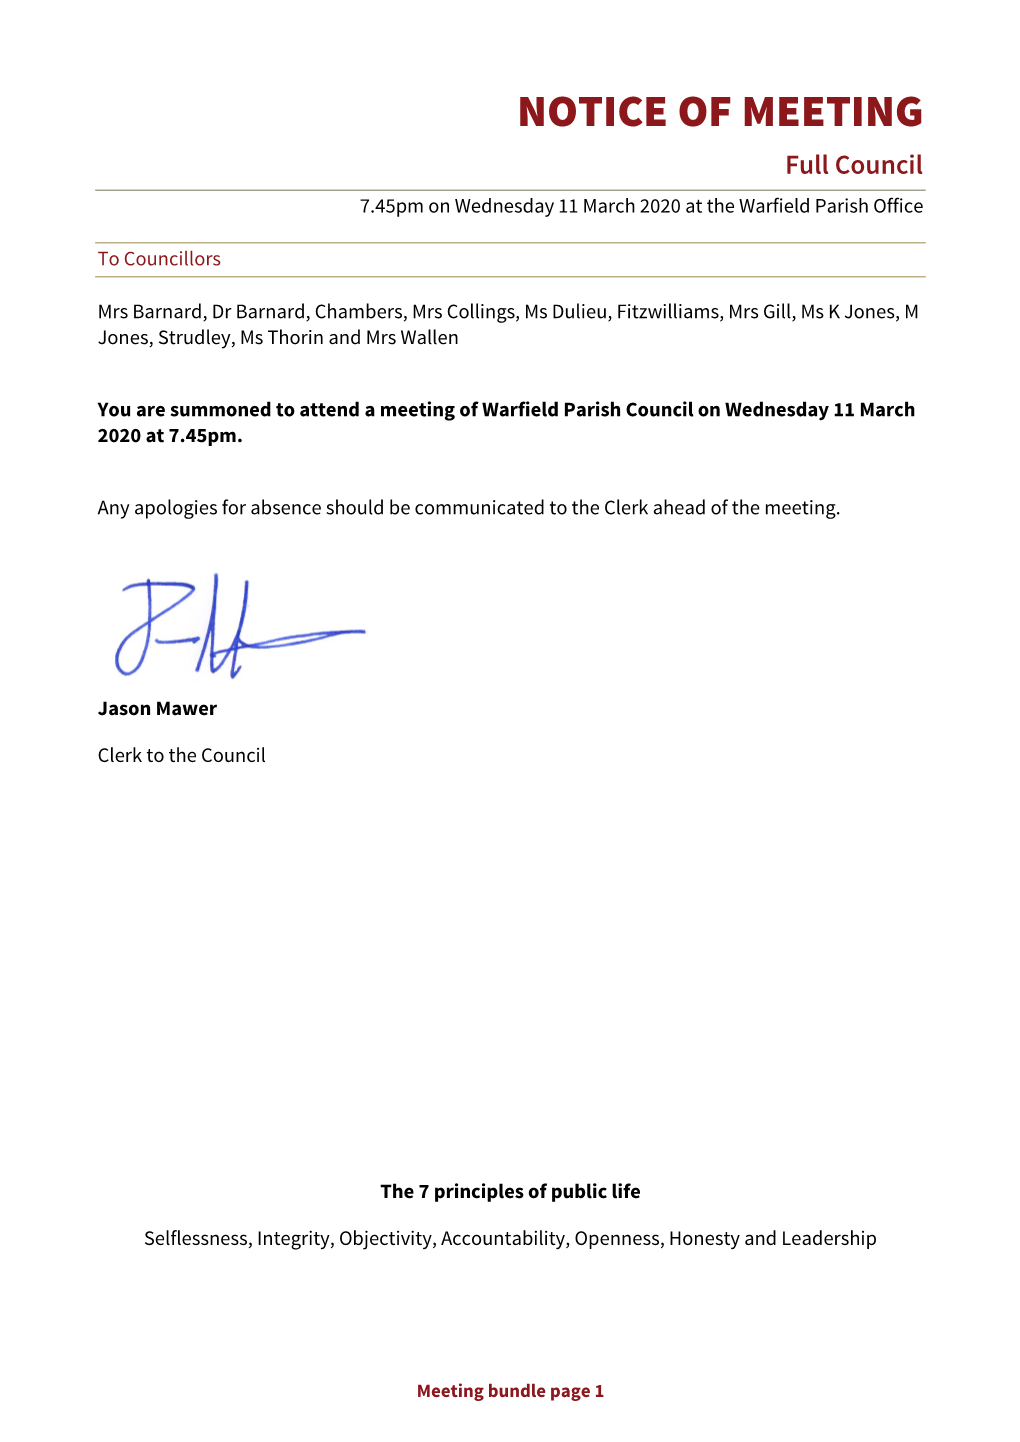 NOTICE of MEETING Full Council 7.45Pm on Wednesday 11 March 2020 at the Warfield Parish Office